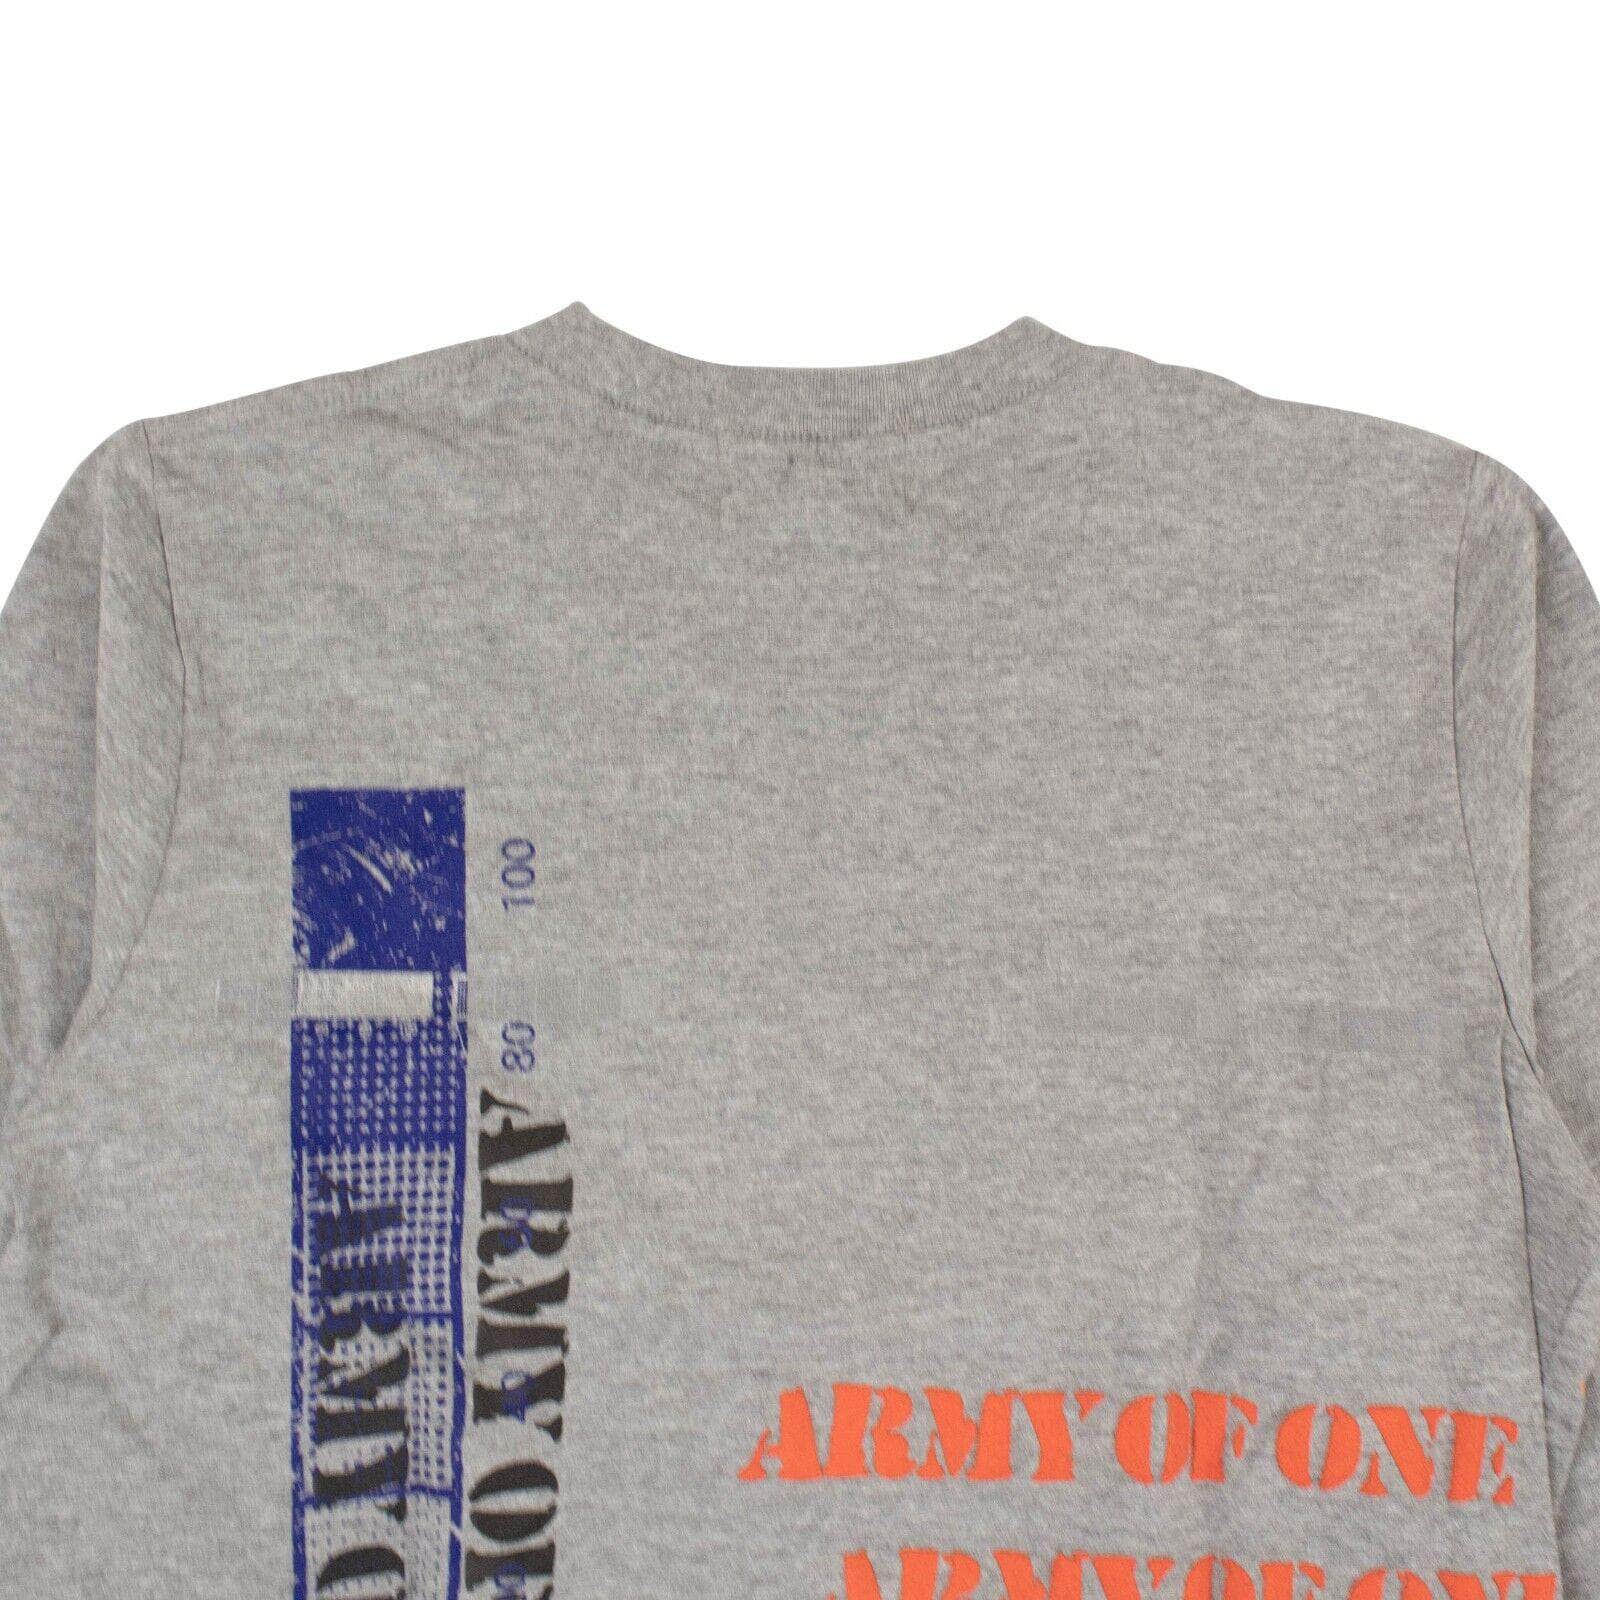 Indvlst channelenable-all, chicmi, couponcollection, gender-mens, indvlst, main-clothing, mens-shoes, MixedApparel, size-l, size-s, size-xxl, under-250 S / INDF19-HPALS Grey Hand Printed Army Of One Long Sleeve T-Shirt 95-IDV-1005/S 95-IDV-1005/S